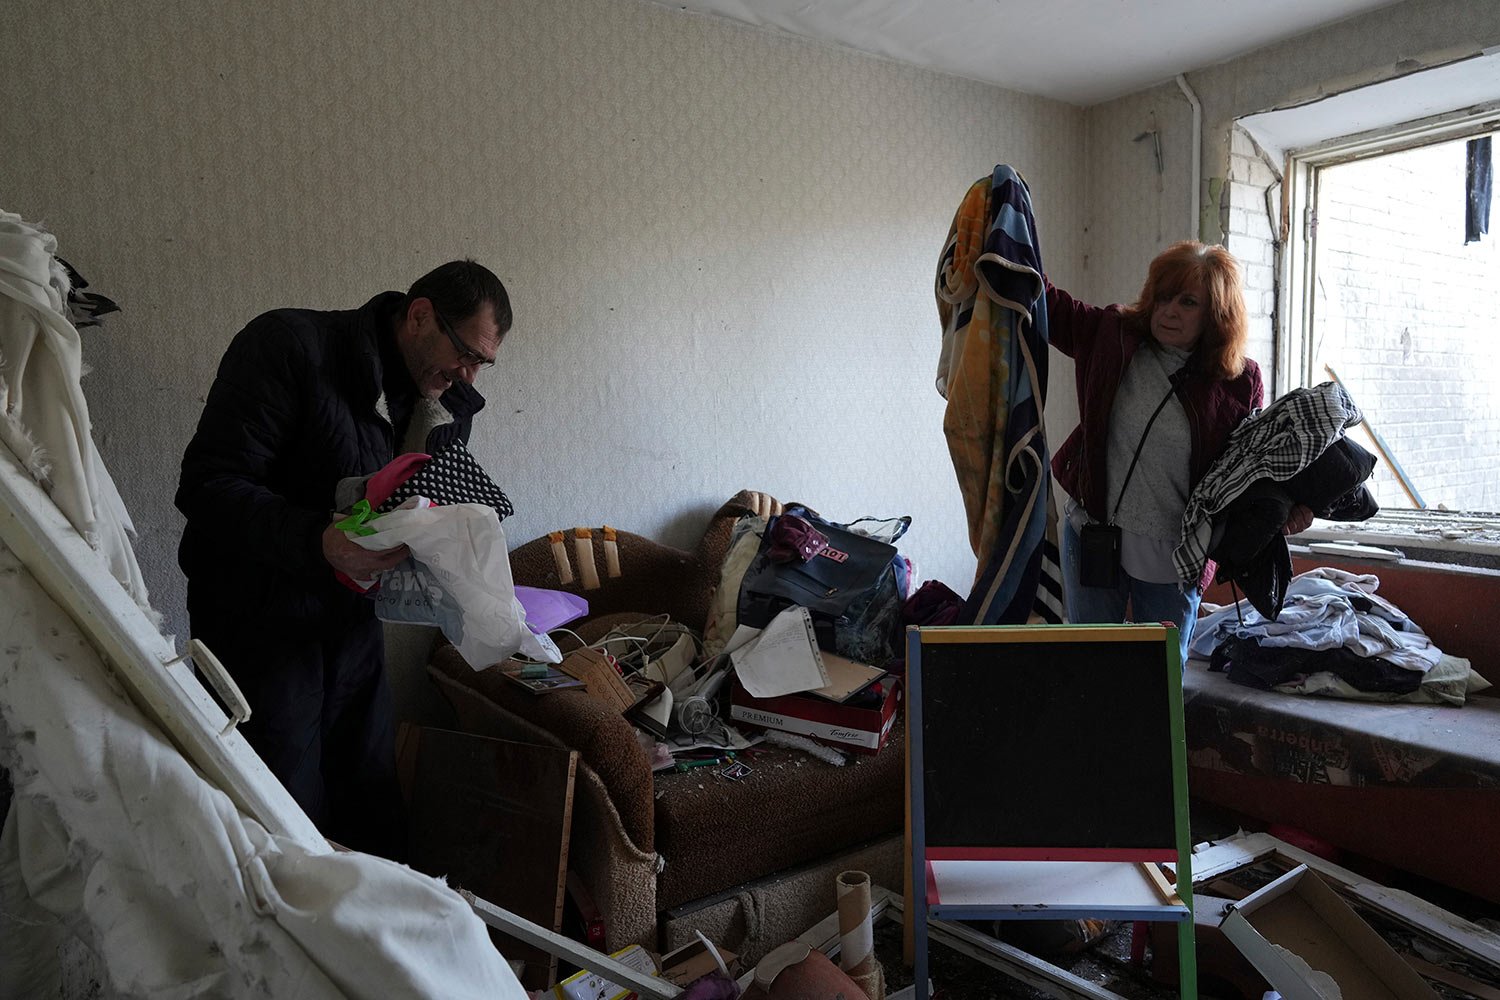  Serhiy, left, and Liumila collect unbroken belongings at their children's apartments damaged by a Russian attack on the outskirts of Chernihiv, Ukraine, Thursday, April 7, 2022. (AP Photo/Evgeniy Maloletka) 